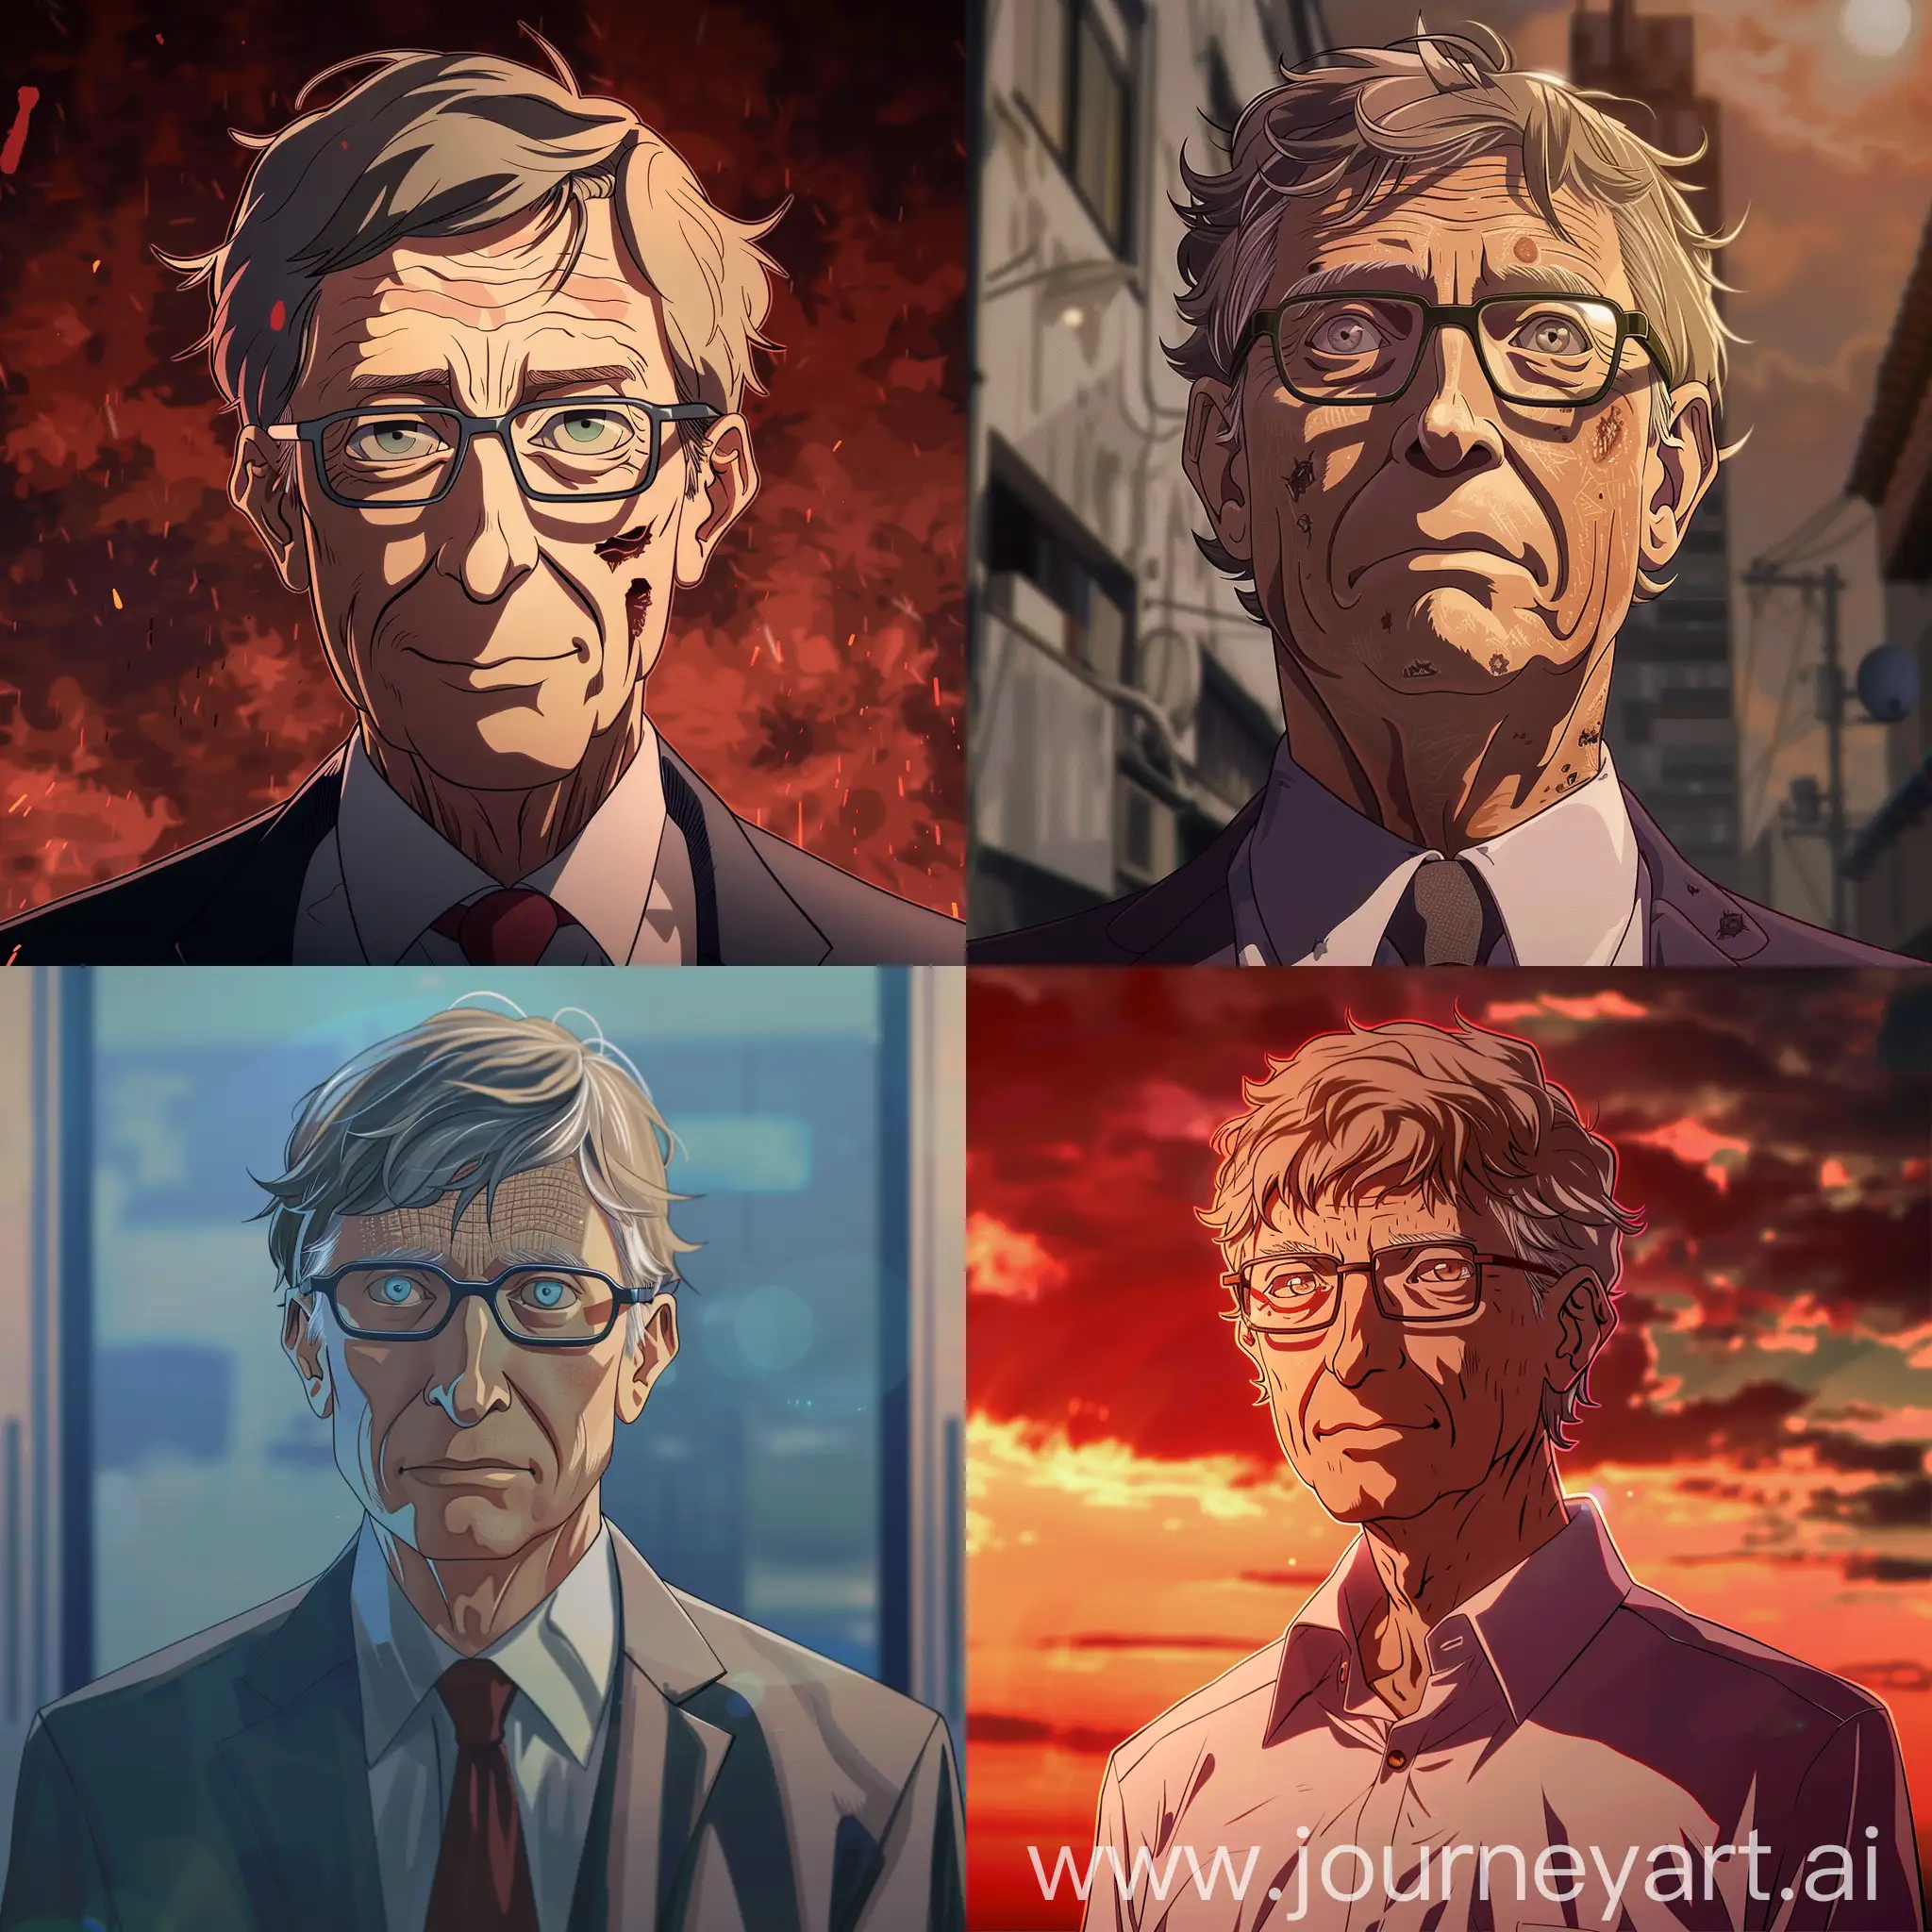 Bill-Gates-in-Anime-Style-Virtual-Life-Concept